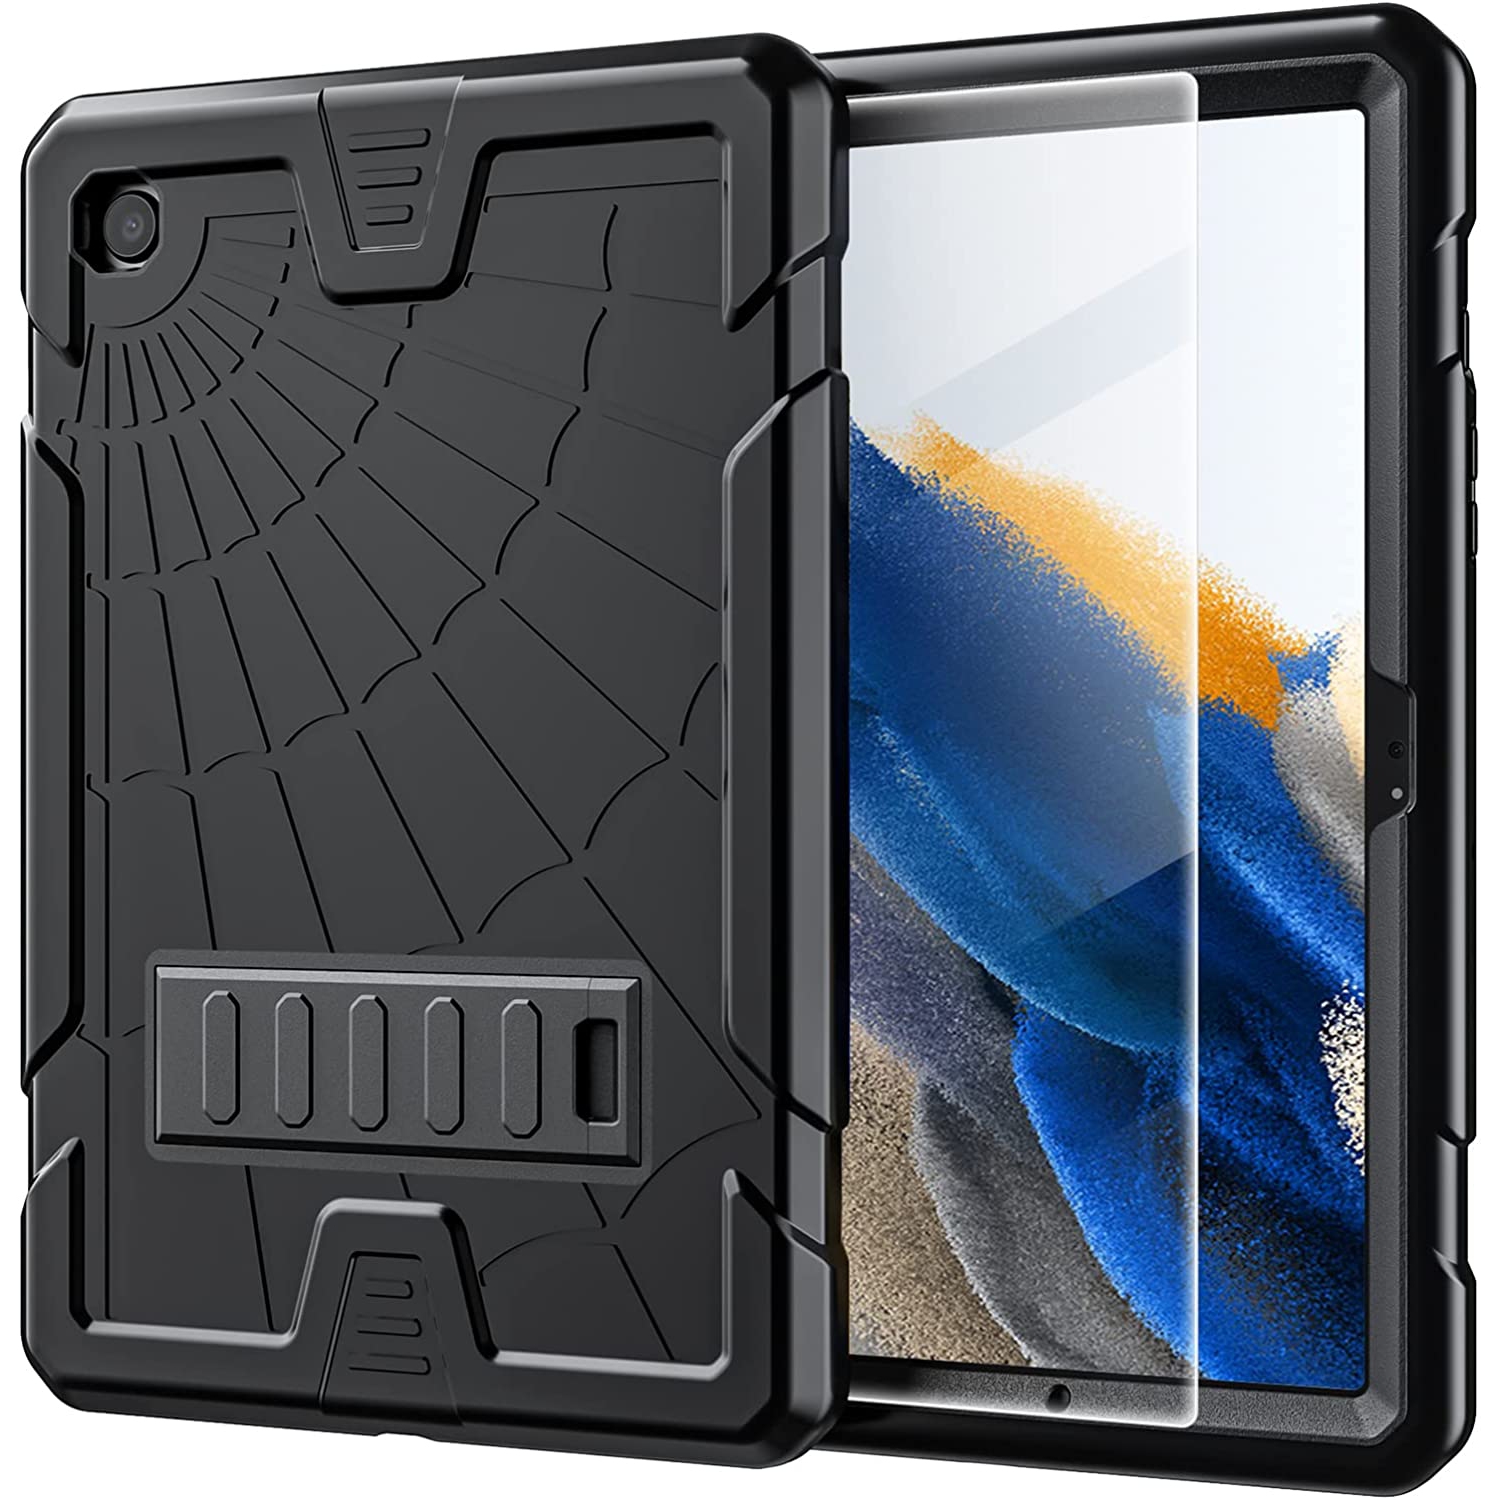 T Samsung Galaxy Tab A8 Case 10.5 Inch 2022 with Glass Screen Protector+Stand SM-X200/X205/X207 Case for Kids Heavy Duty Defender Cover Case for Samsung A8 Tablet 10.5 Black